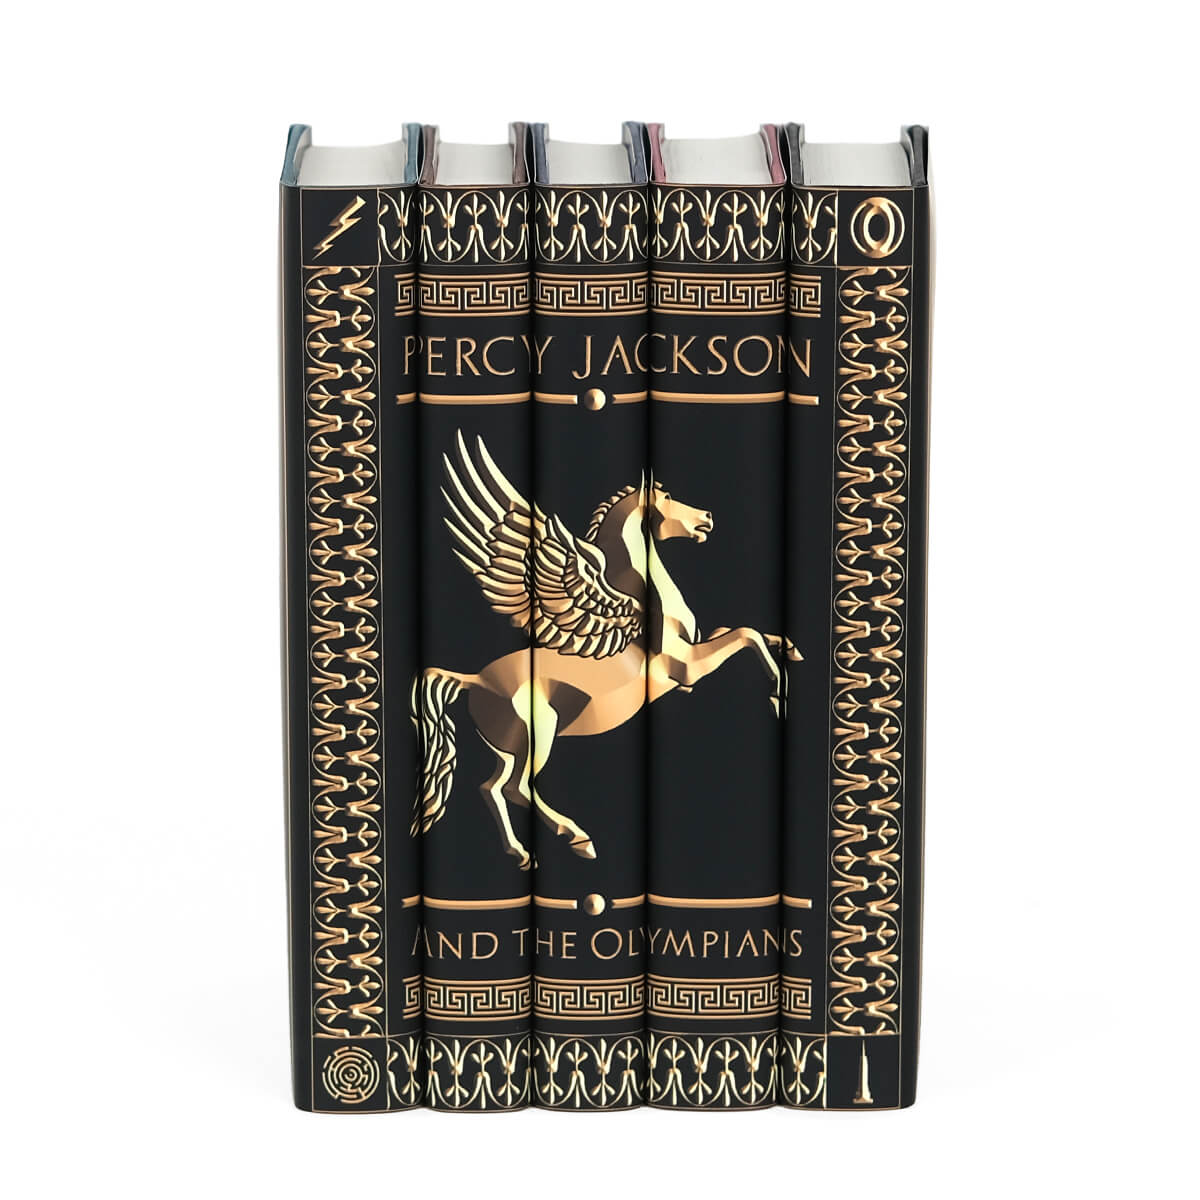 Custom collectible Percy Jackson dust jackets from Juniper Custom. The solid black covers feature an gold embossed style illustration of a pegasus surrounded by ornamental borders with the series title across the spines.